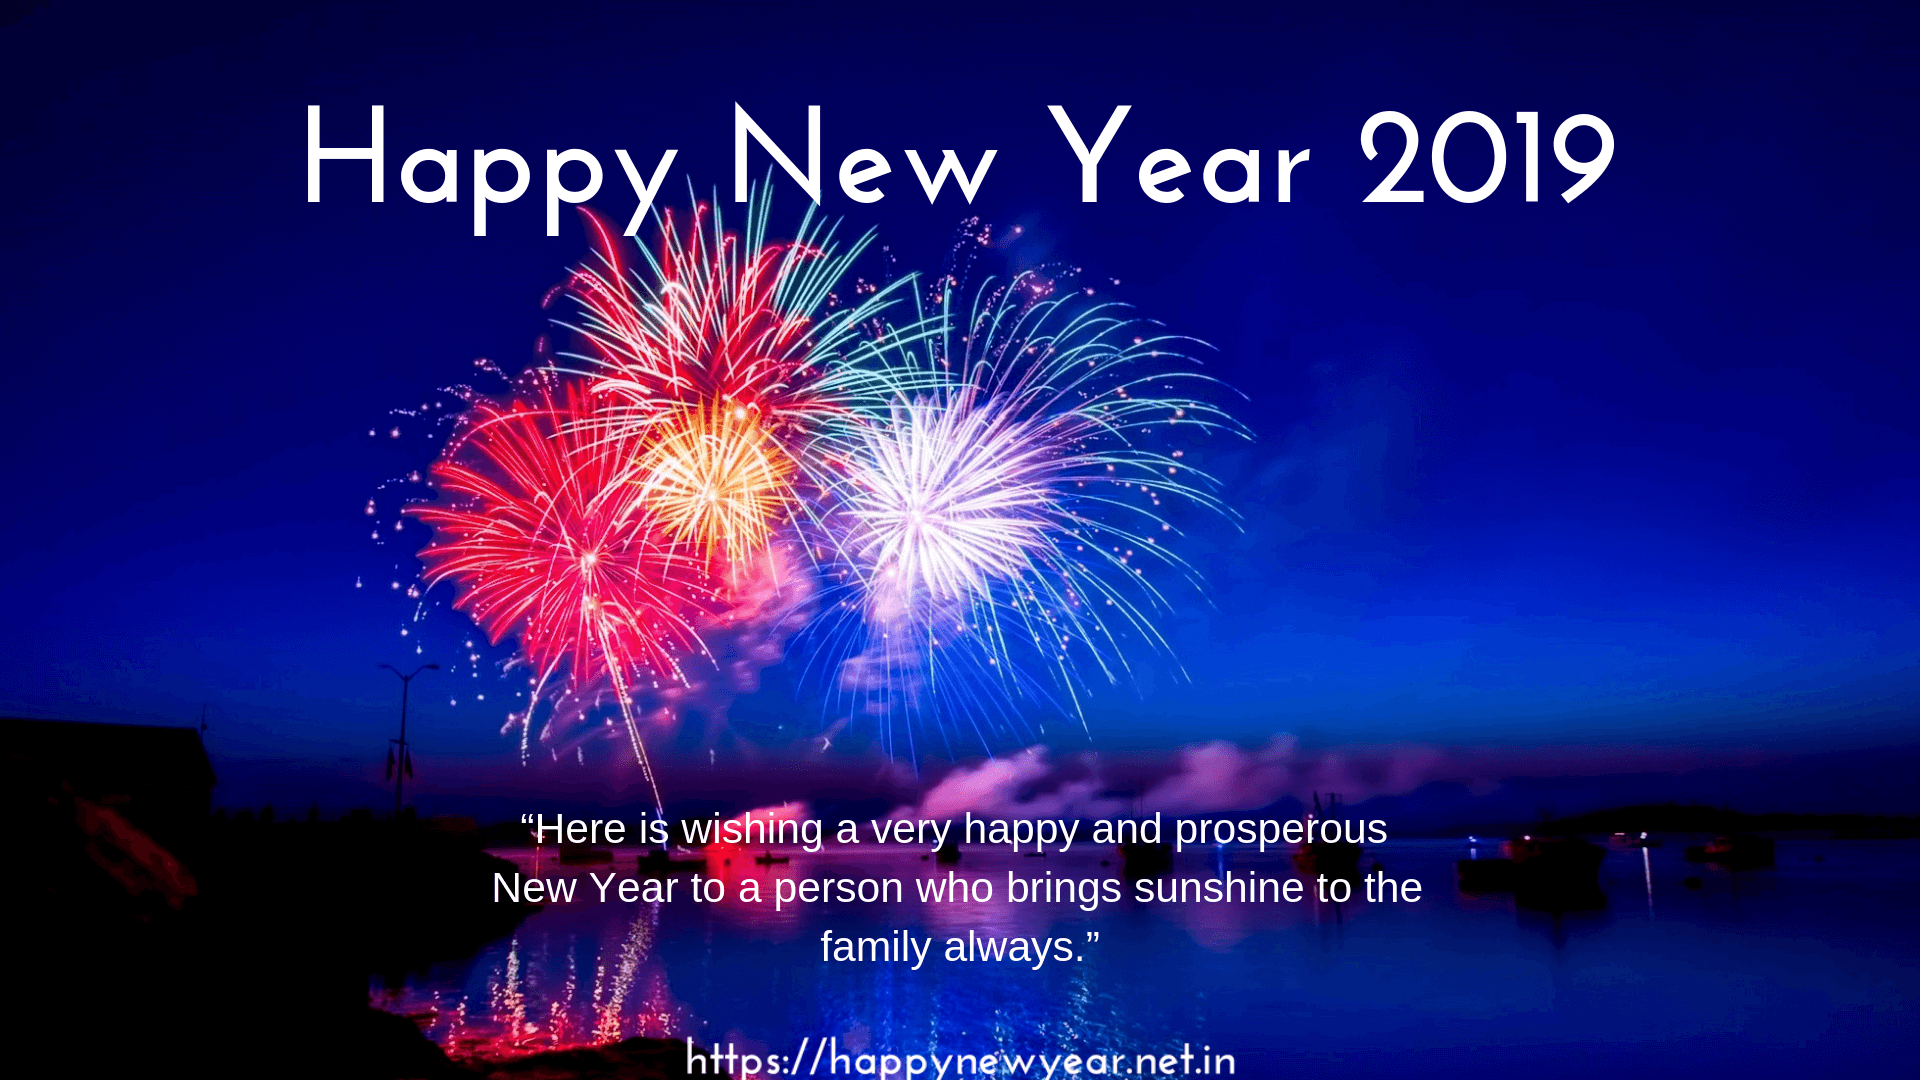 Happy New Year Images 2019 Download Happy New Year - Happy And Prosperous New Year 2019 , HD Wallpaper & Backgrounds